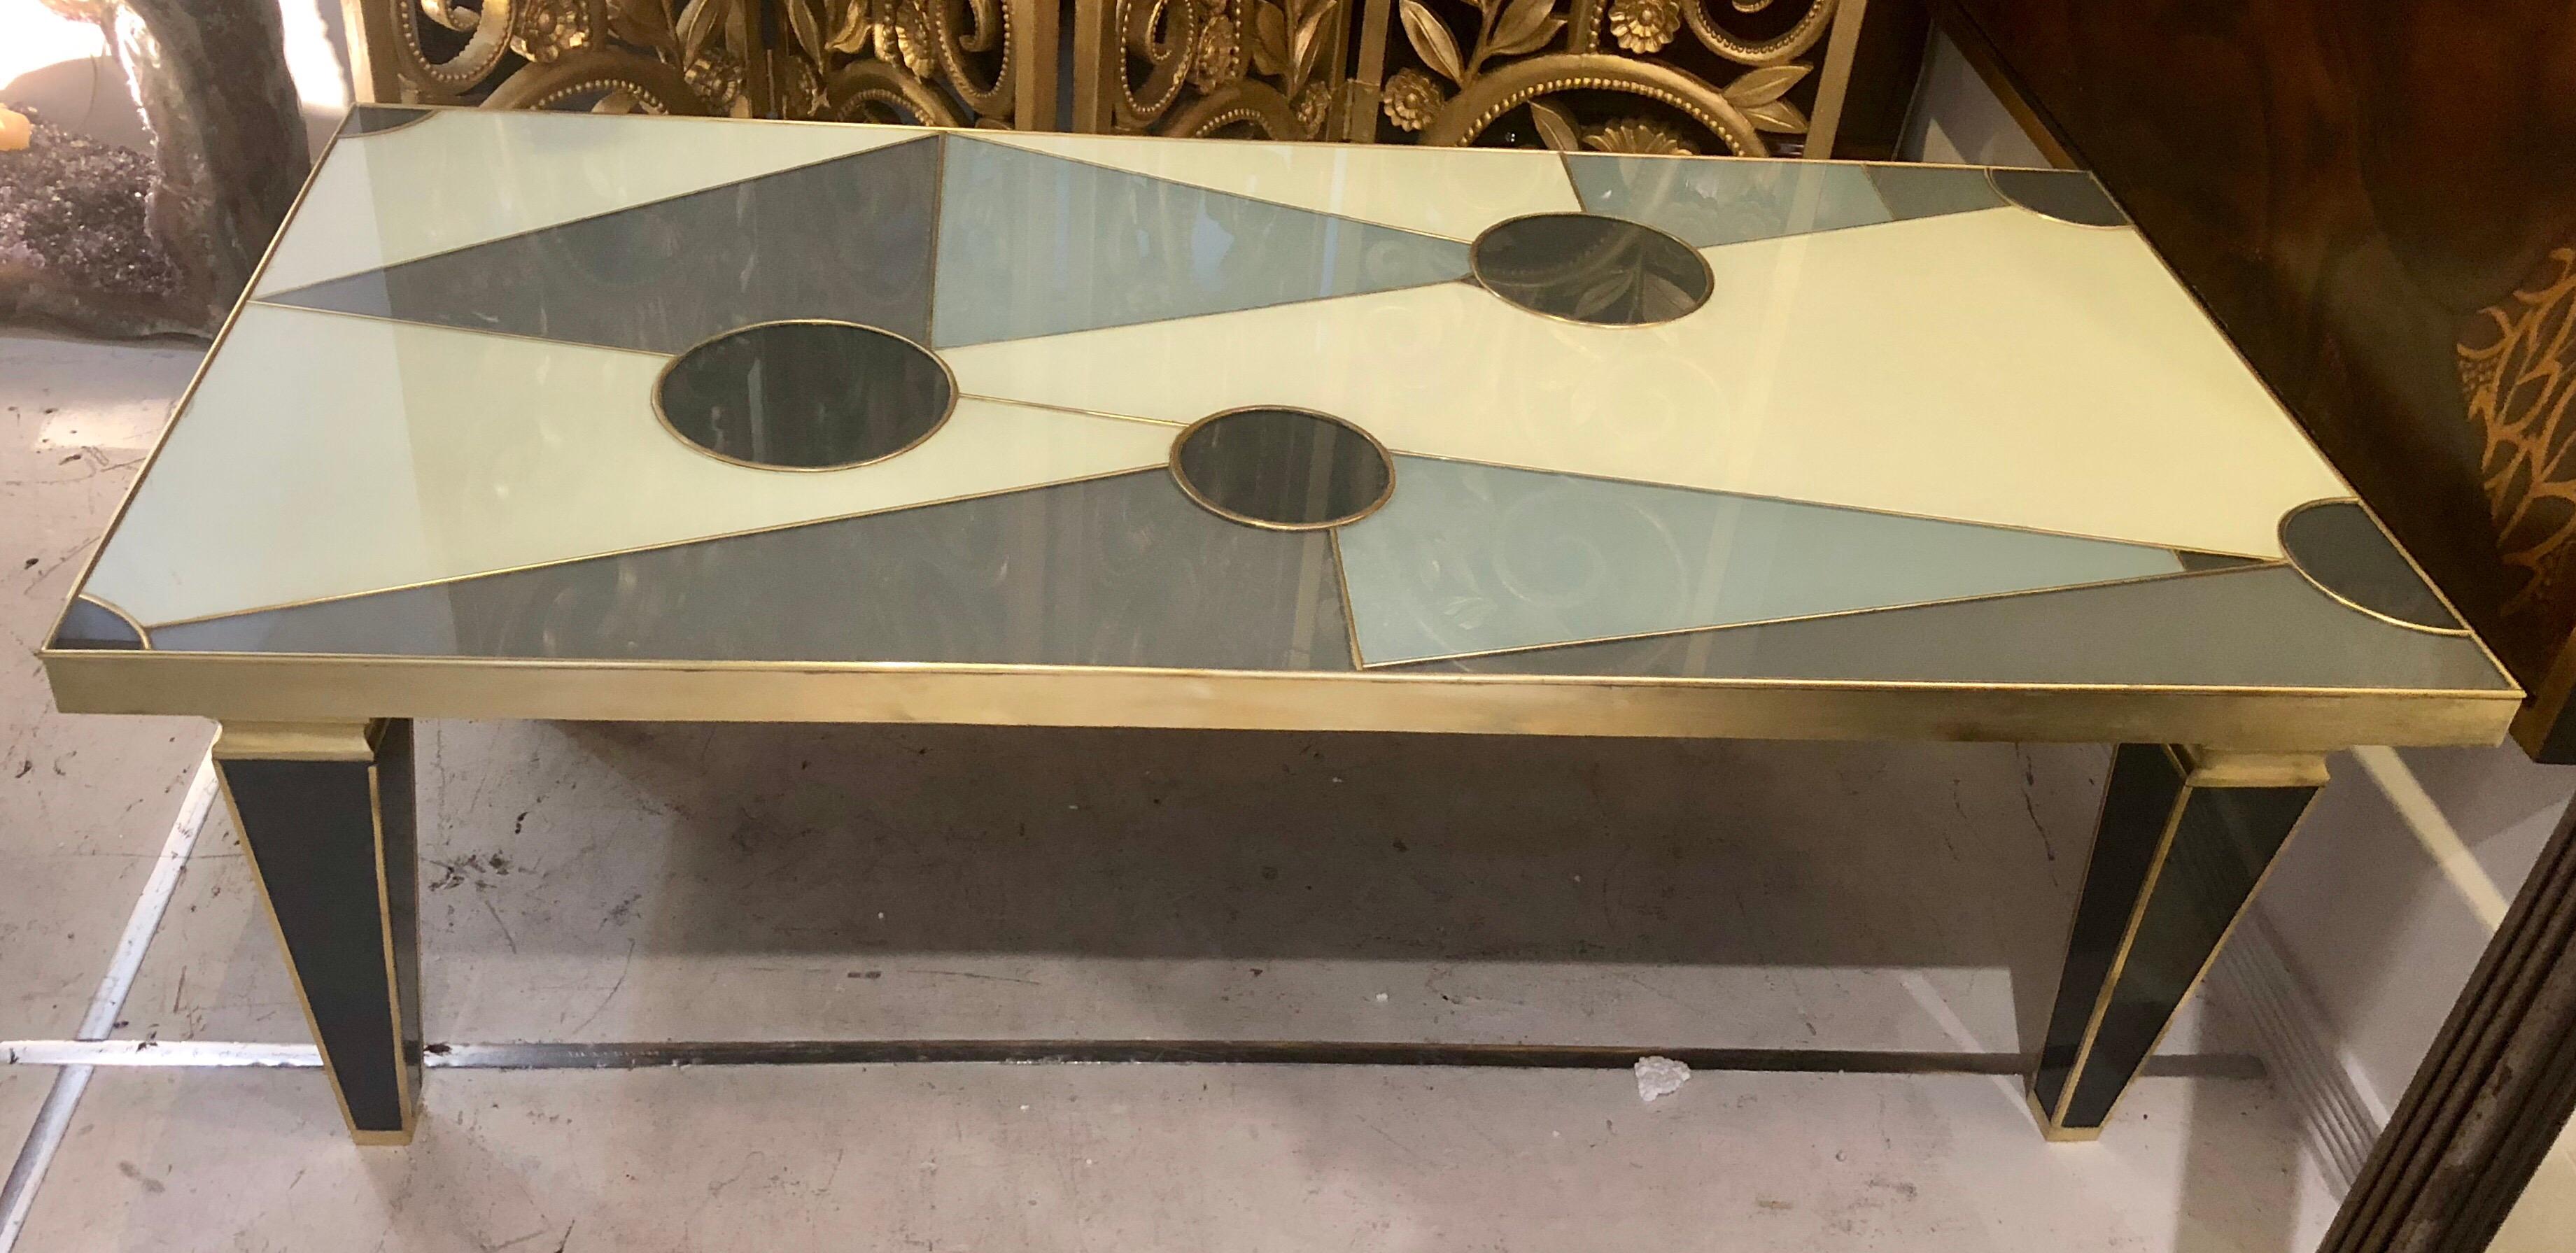 A Beautiful Pattern of Reverse Painted Glass and Brass Top this Sublime Italian Coffee Table, Circa 1950s